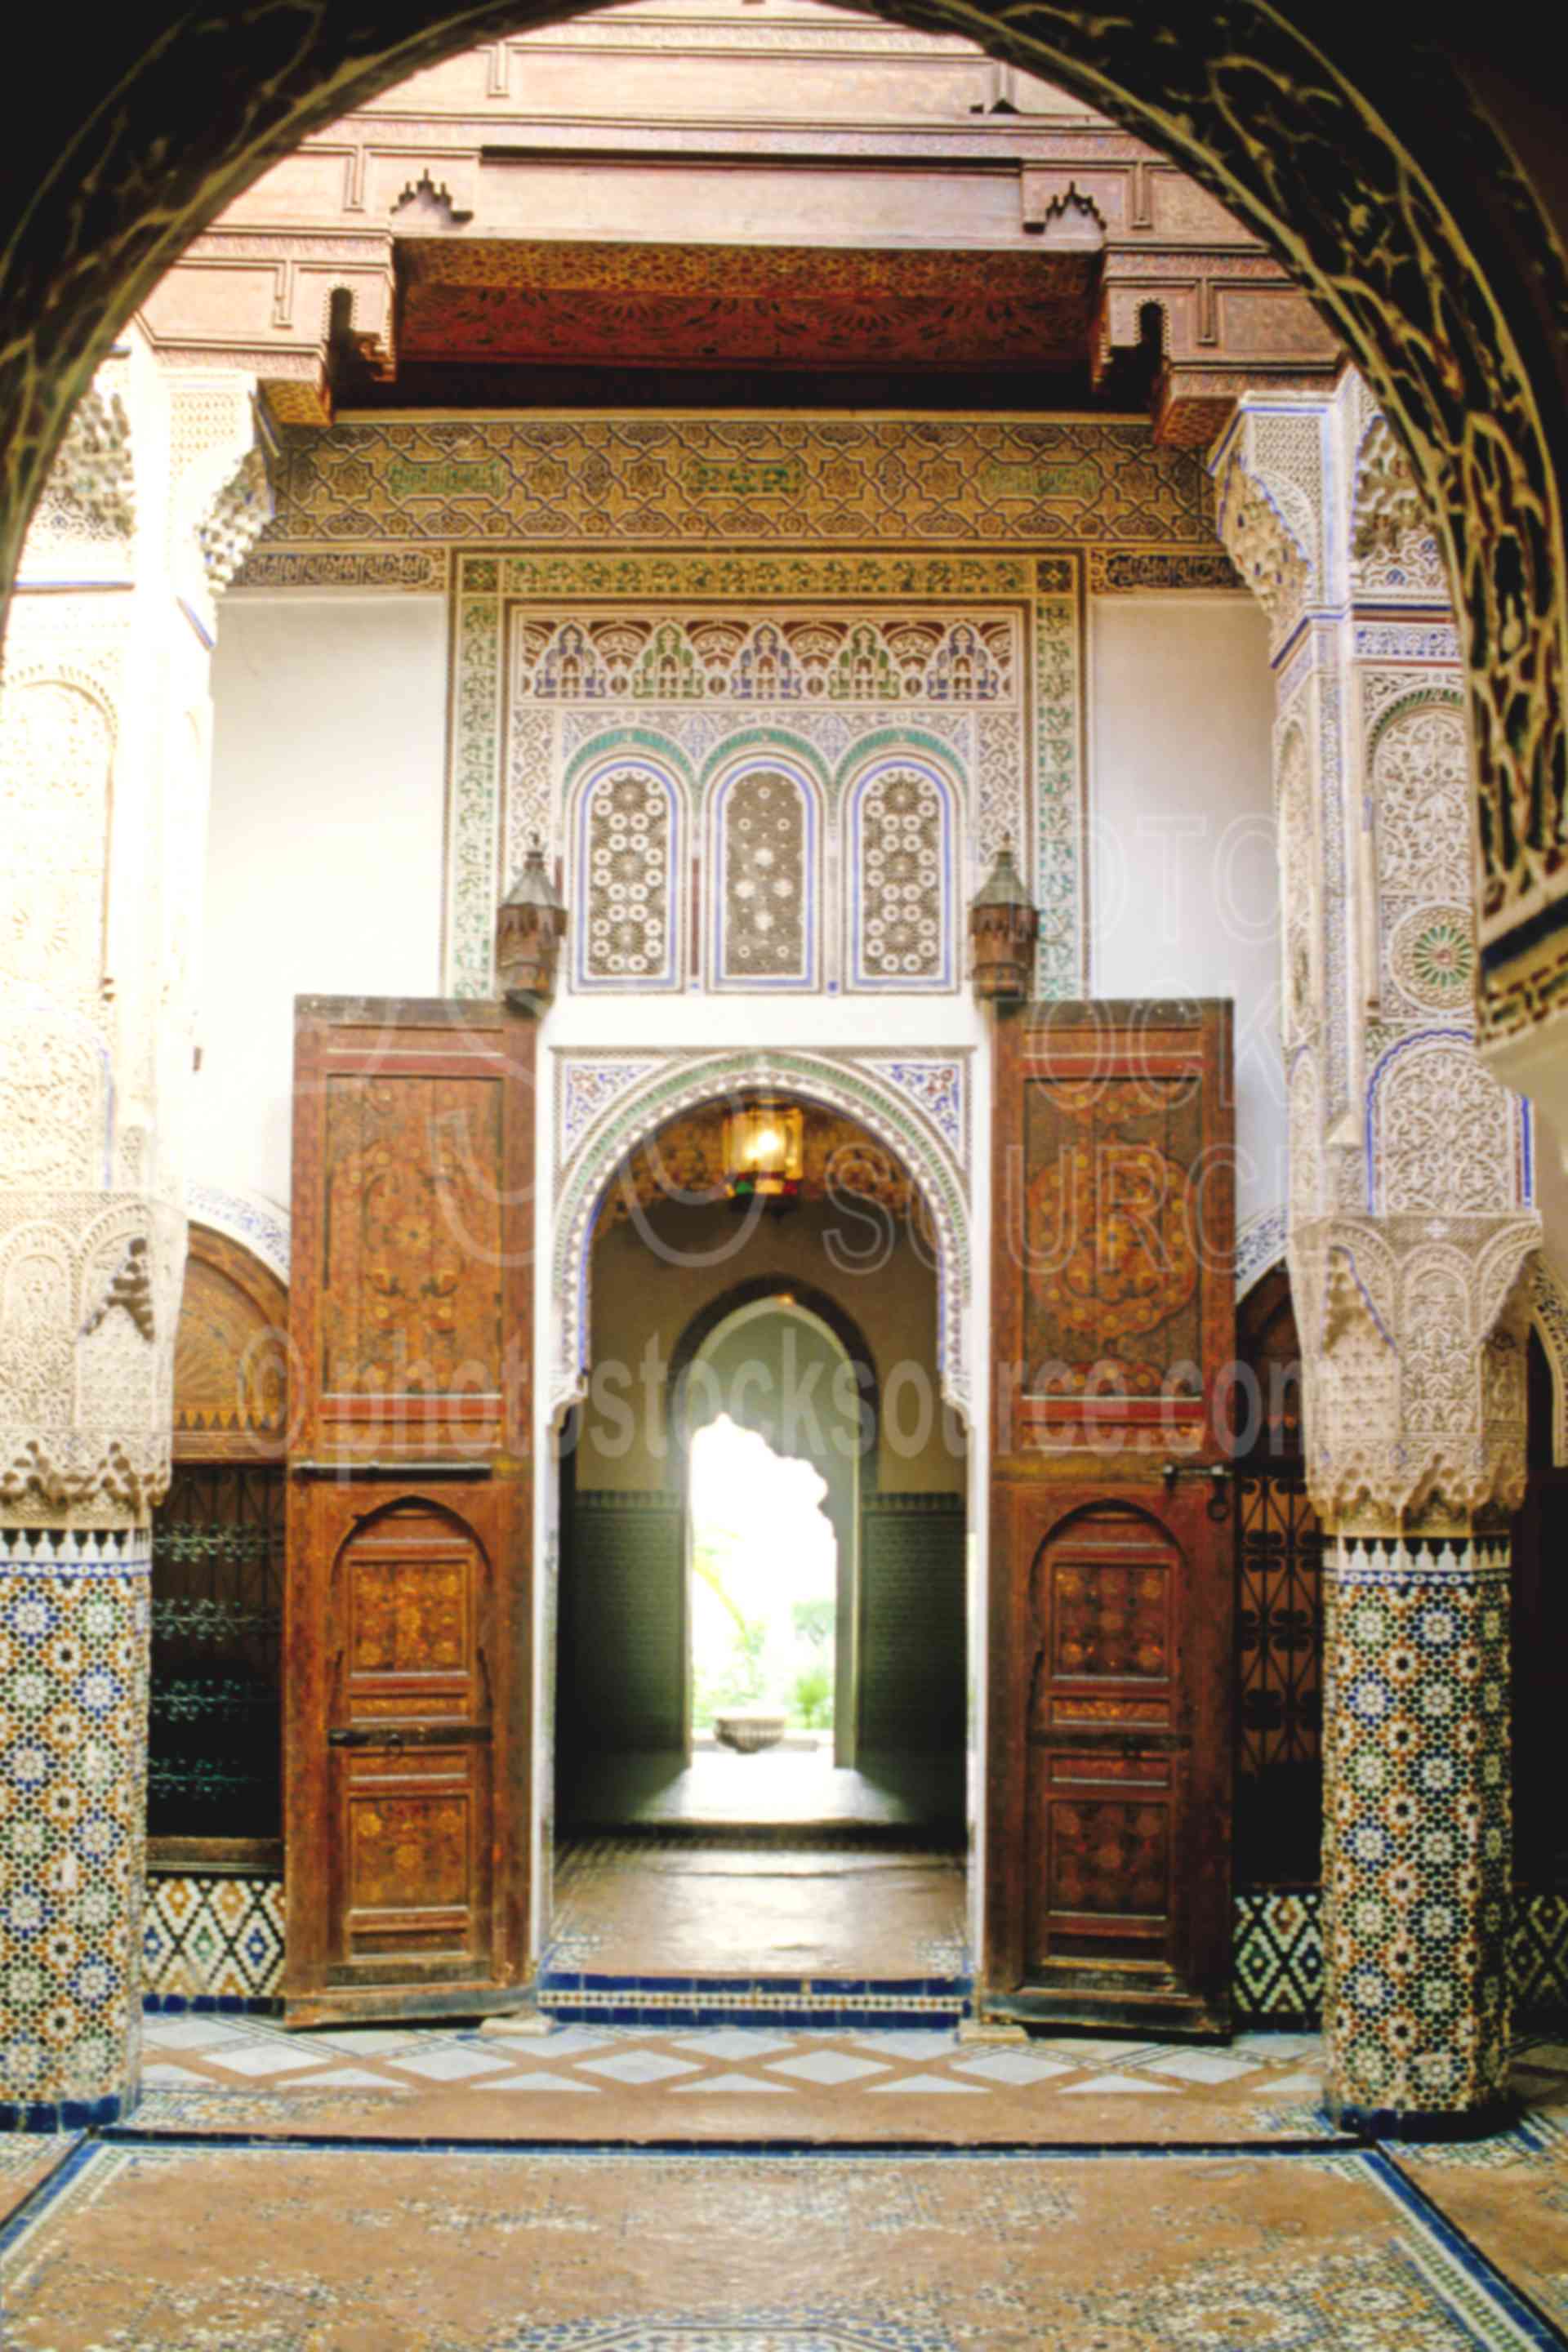 Old School,arch,architecture,door,morocco mosques